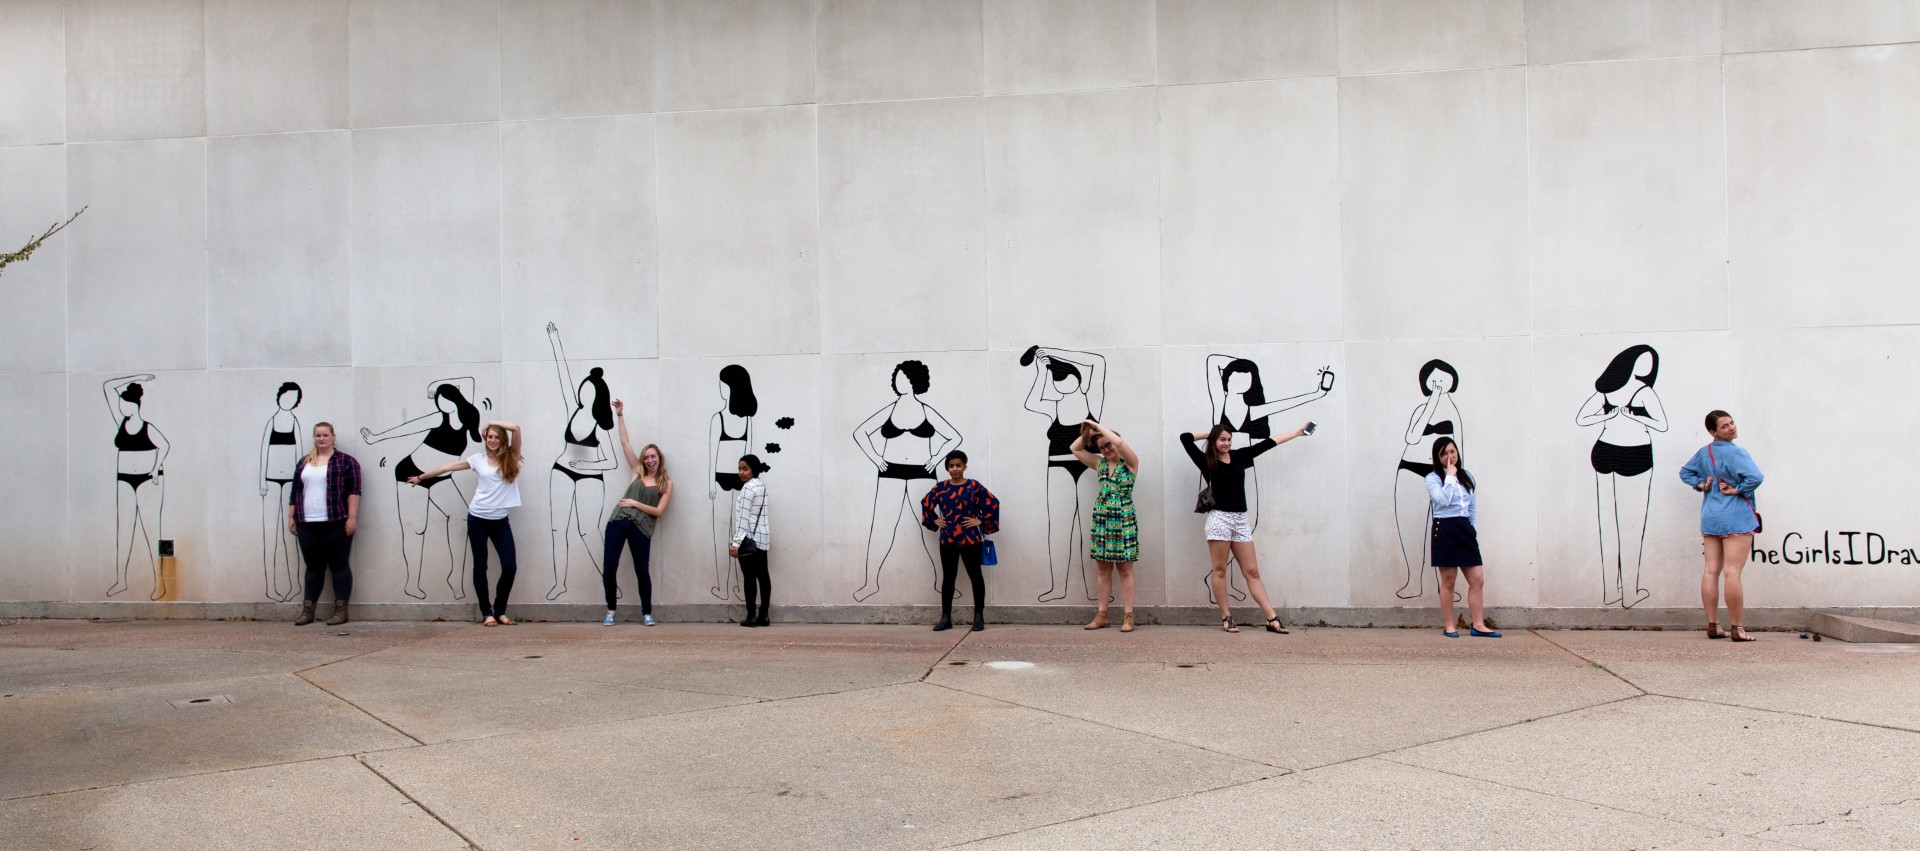 Photograph of wall with mural. Mural consists of 10 women in undergarments in various poses. Women are all rendered in black lines made out of duct tape. People are posed in front of each figure in mural mimicking the pose. 